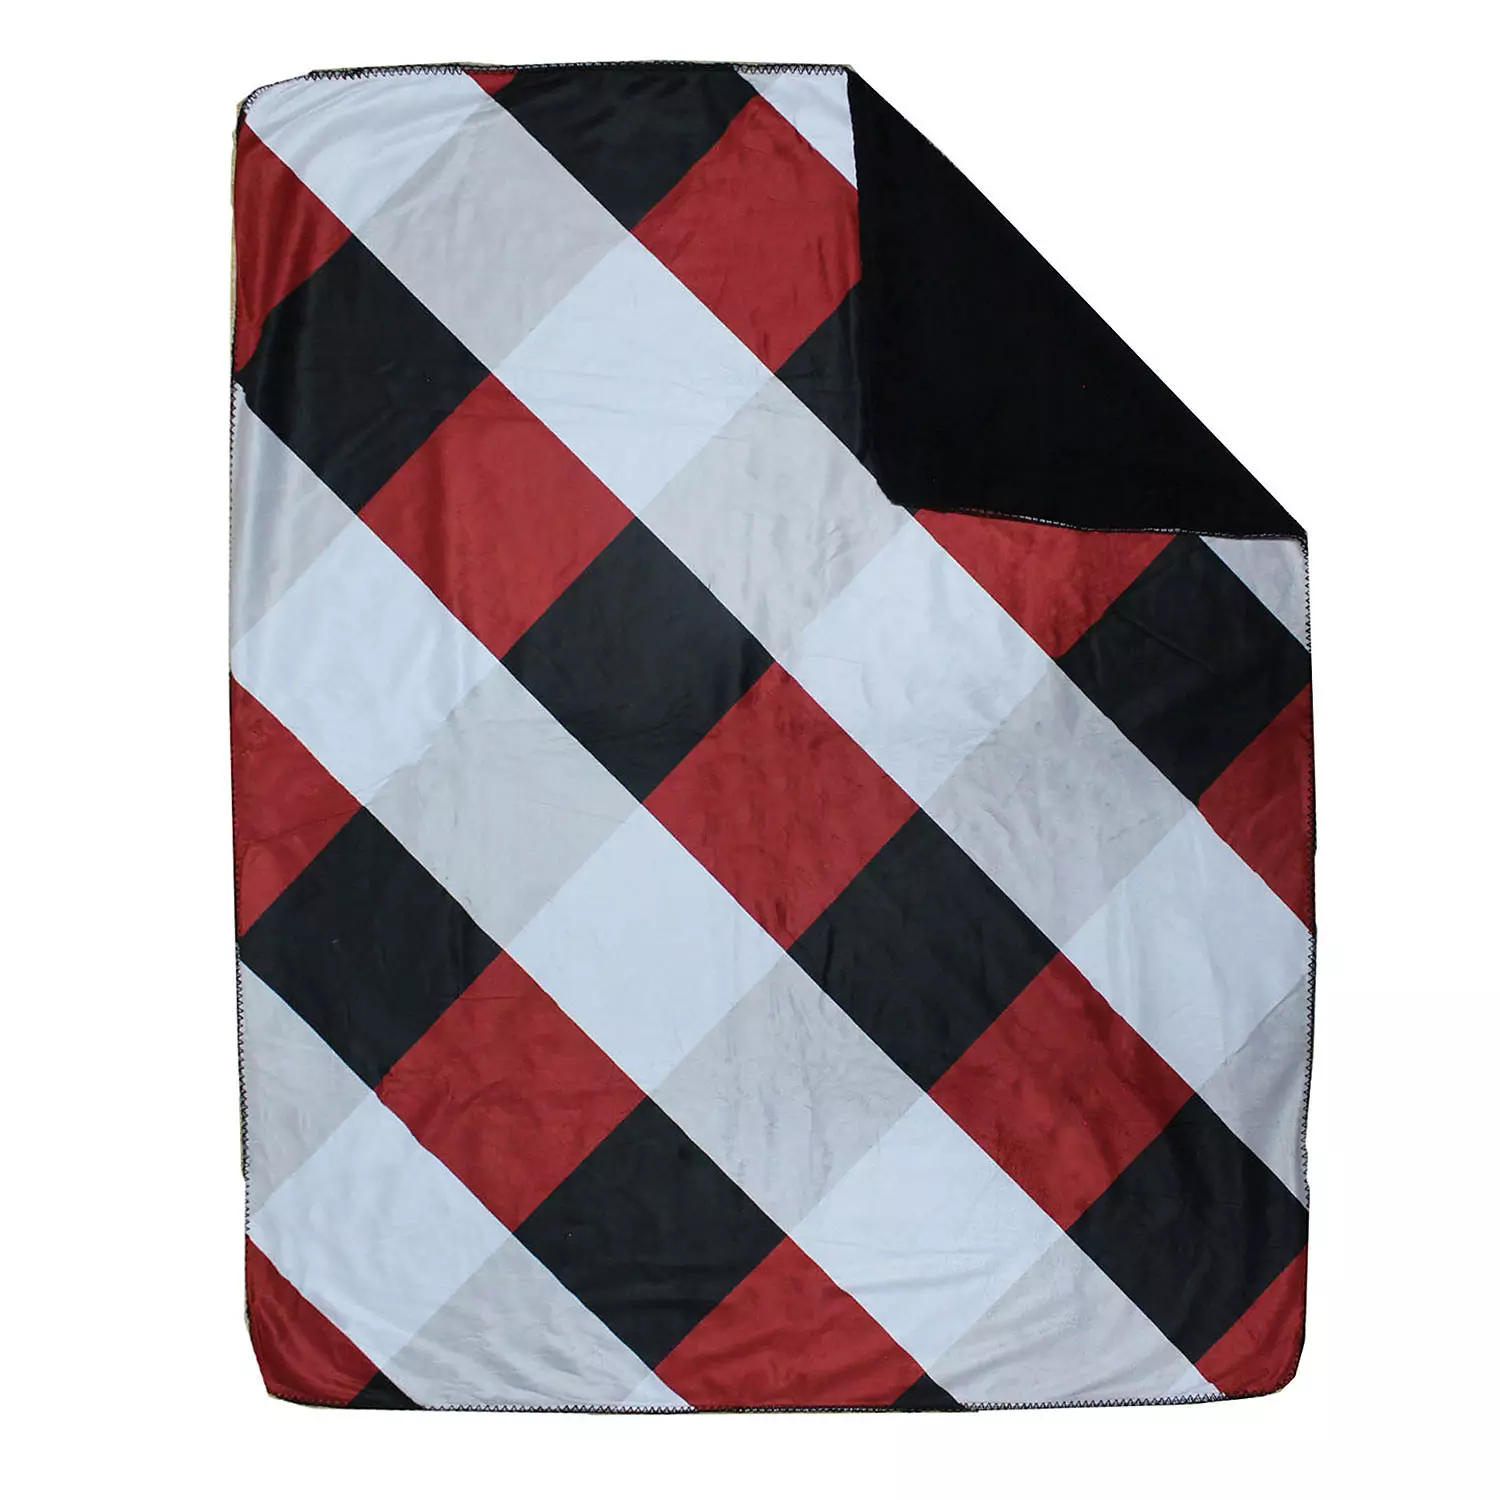 Printed checkered throw, 50"x60", red